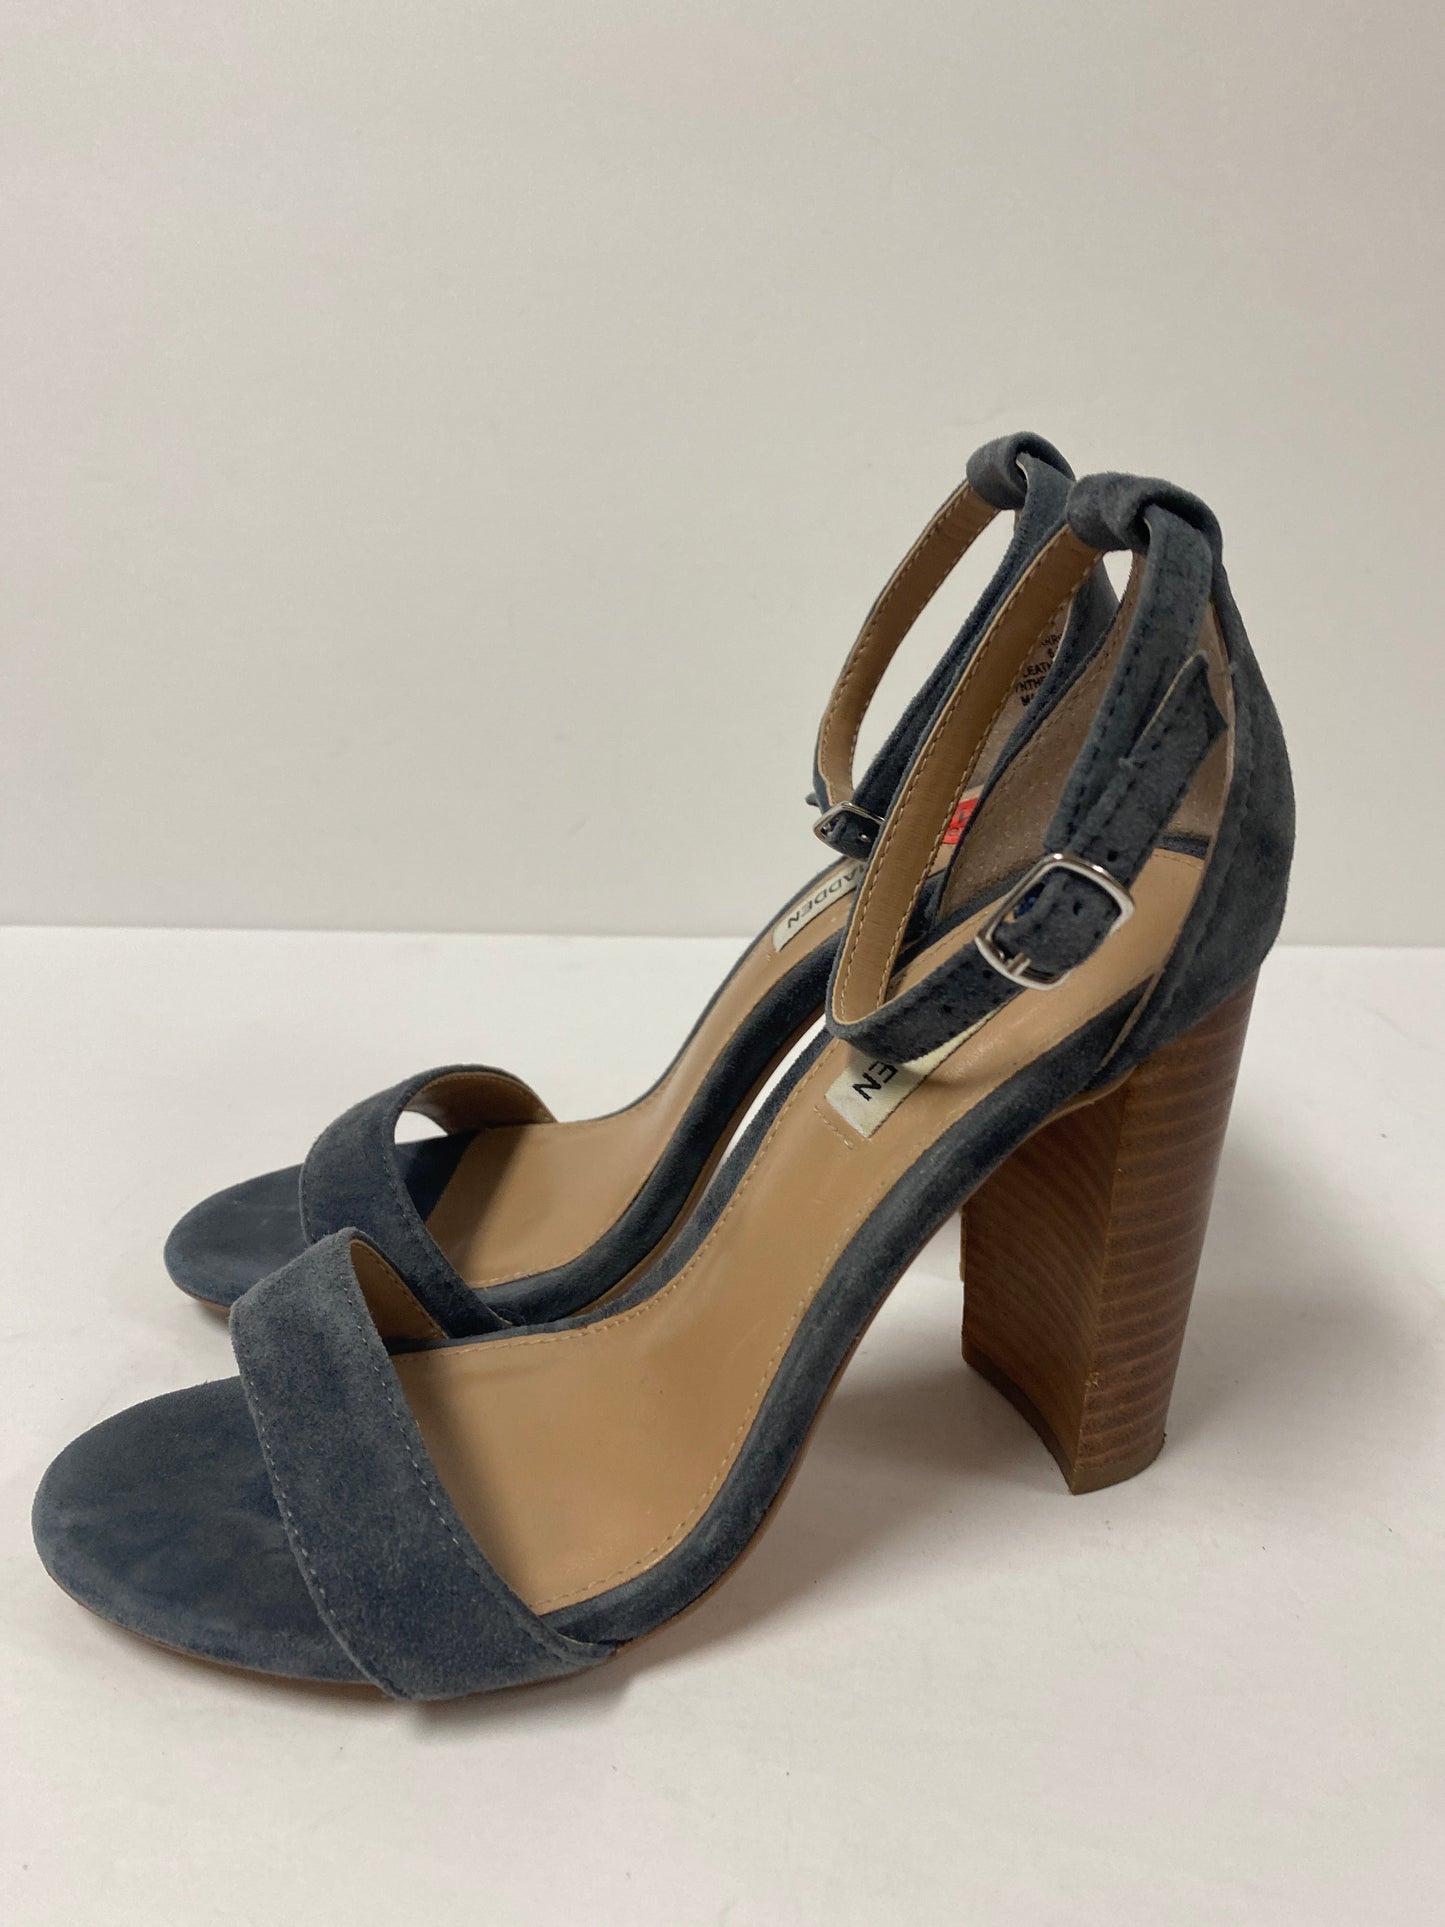 Shoes Heels Block By Steve Madden  Size: 6.5